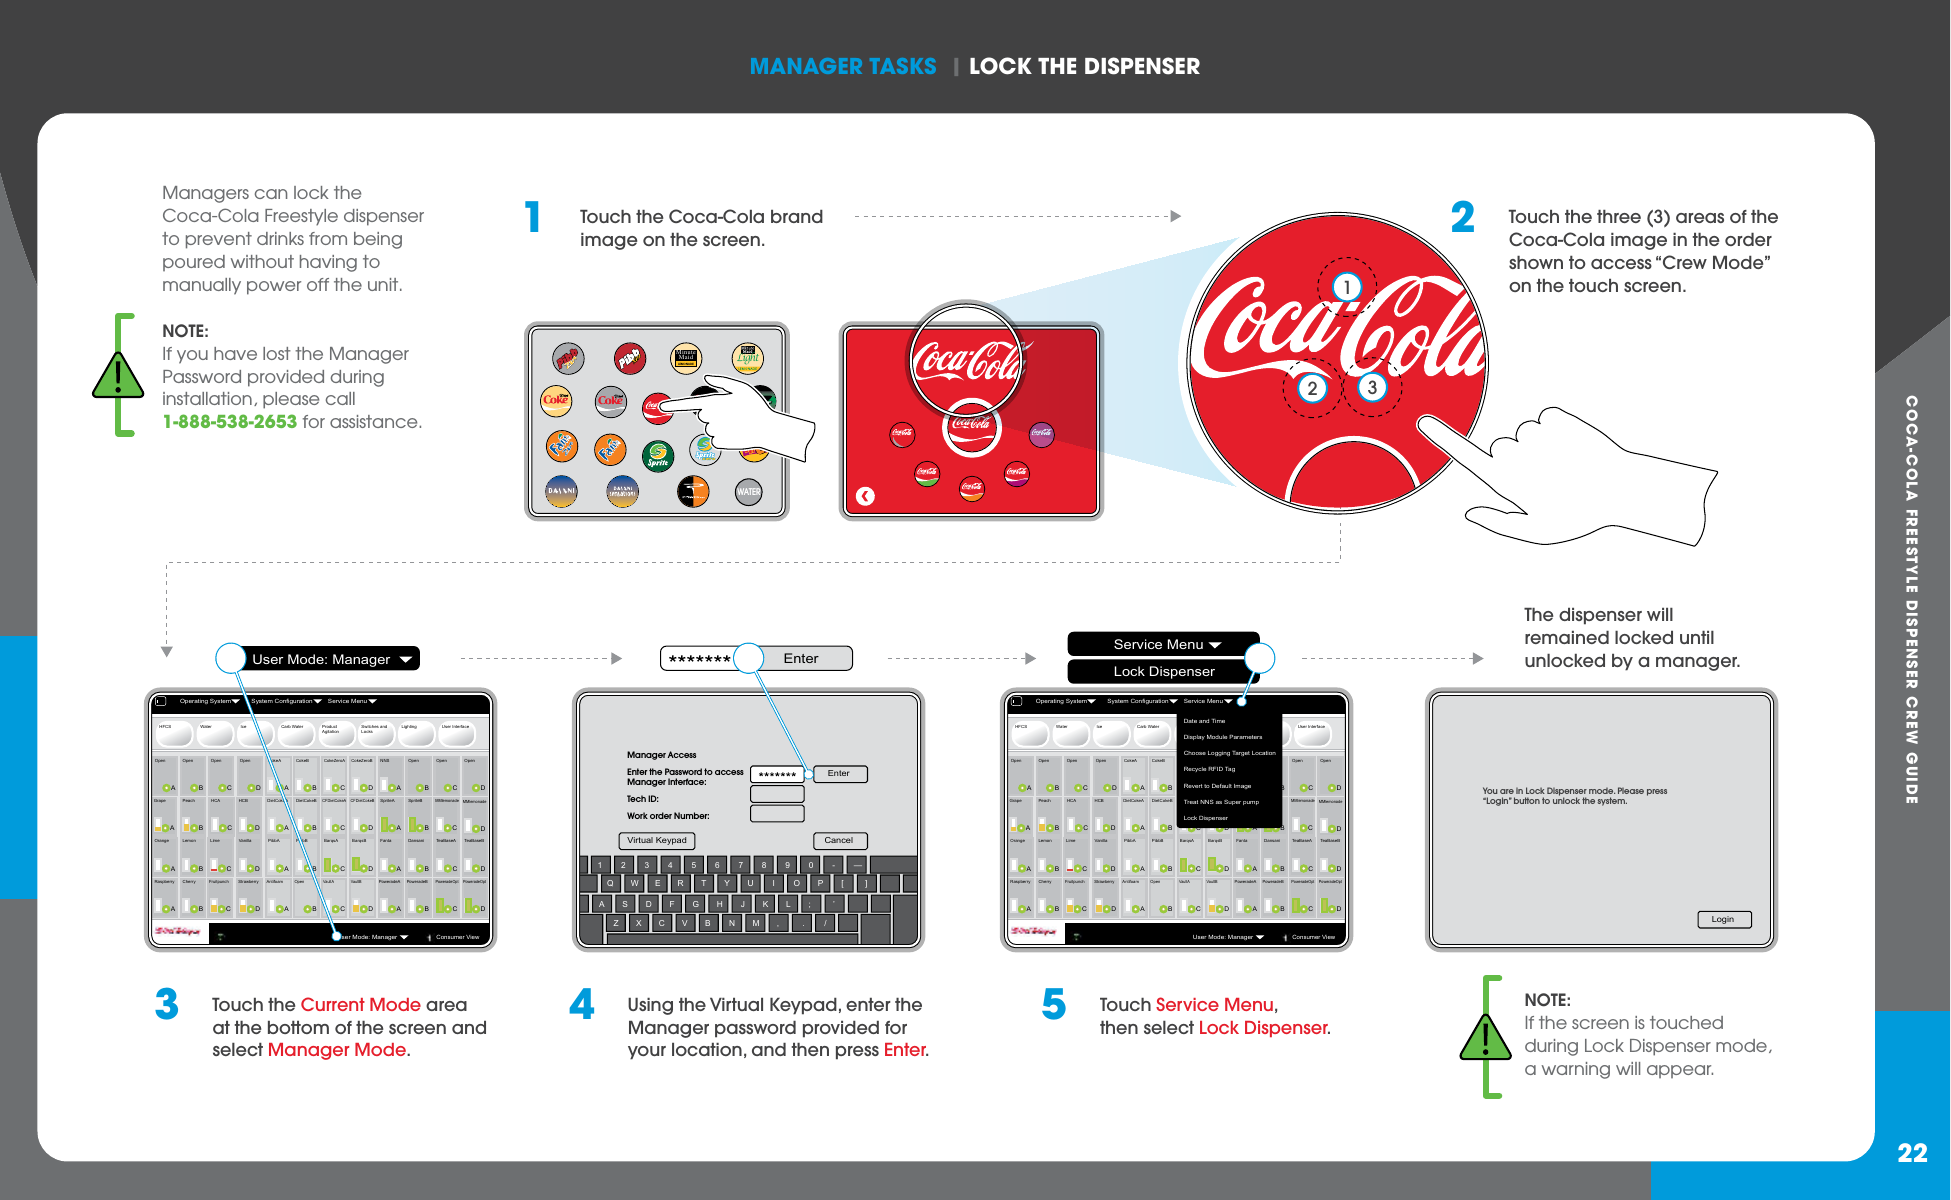 COCA-COLA FREESTYLE DISPENSER CREW GUIDEmANAGER TASkS  | LOCk ThE DISPENSER22NOTE:If you have lost the Manager Password provided during installation, please call 1-888-538-2653 for assistance.Managers can lock the Coca-Cola Freestyle dispenser to prevent drinks from being poured without having to manually power off the unit.  1  Touch the Coca-Cola brand image on the screen.3  Touch the Current Mode area at the bottom of the screen and select Manager Mode.2  Touch the three (3) areas of the Coca-Cola image in the order shown to access “Crew Mode” on the touch screen.HFCS Water Ice Carb Water ProductAgitationSwitches and LocksLighting User InterfaceAOpenBOpenCOpenDOpenAGrapeBPeachCHCADHCBAOrangeBLemonCLimeDVanillaARaspberryBCherryCFruitpunchDStrawberryBOpenCOpenDOpenCMMlemonadeAFantaBDansaniCTeaBaseADTeaBaseBAPoweradeABPoweradeBCPoweradeOptANNSBSpriteBASpriteADMMlemonadeDPoweradeOptBCokeBCCFDietCokeAAPibbABPibbBDBarqsBAAntifoamBOpenCVaultAACokeABDietCokeBADietCokeADCFDietCokeBCCokeZeroADCokeZeroBCBarqsADVaultBOperating System System Configuration Service MenuUser Mode: ManagerConsumer ViewHFCS Water Ice Carb Water ProductAgitationSwitches and LocksLighting User InterfaceAOpenBOpenCOpenDOpenAGrapeBPeachCHCADHCBAOrangeBLemonCLimeDVanillaARaspberryBCherryCFruitpunchDStrawberryBOpenCOpenDOpenCMMlemonadeAFantaBDansaniCTeaBaseADTeaBaseBAPoweradeABPoweradeBCPoweradeOptANNSBSpriteBASpriteADMMlemonadeDPoweradeOptBCokeBCCFDietCokeAAPibbABPibbBDBarqsBAAntifoamBOpenCVaultAACokeABDietCokeBADietCokeADCFDietCokeBCCokeZeroADCokeZeroBCBarqsADVaultBDate and TimeDisplay Module ParametersChoose Logging Target LocationRecycle RFID TagRevert to Default ImageTreat NNS as Super pumpLock DispenserOperating System System Configuration Service MenuUser Mode: ManagerConsumer ViewZXCVBNM, . /ASDFGHJKL; ’Q W E RTYU I OP[ ]1234567890-—EnterCancelVirtual KeypadManager AccessEnter the Password to accessManager Interface:Tech ID:Work order Number:4  Using the Virtual Keypad, enter the Manager password provided for your location, and then press Enter.5  Touch Service Menu, then select Lock Dispenser.NOTE:If the screen is touched during Lock Dispenser mode, a warning will appear.The dispenser will remained locked until unlocked by a manager.User Mode: Manager EnterService MenuLock DispenserWATERMinuteMaidLEMONADELight123LoginYou are in Lock Dispenser mode. Please press“Login” button to unlock the system.